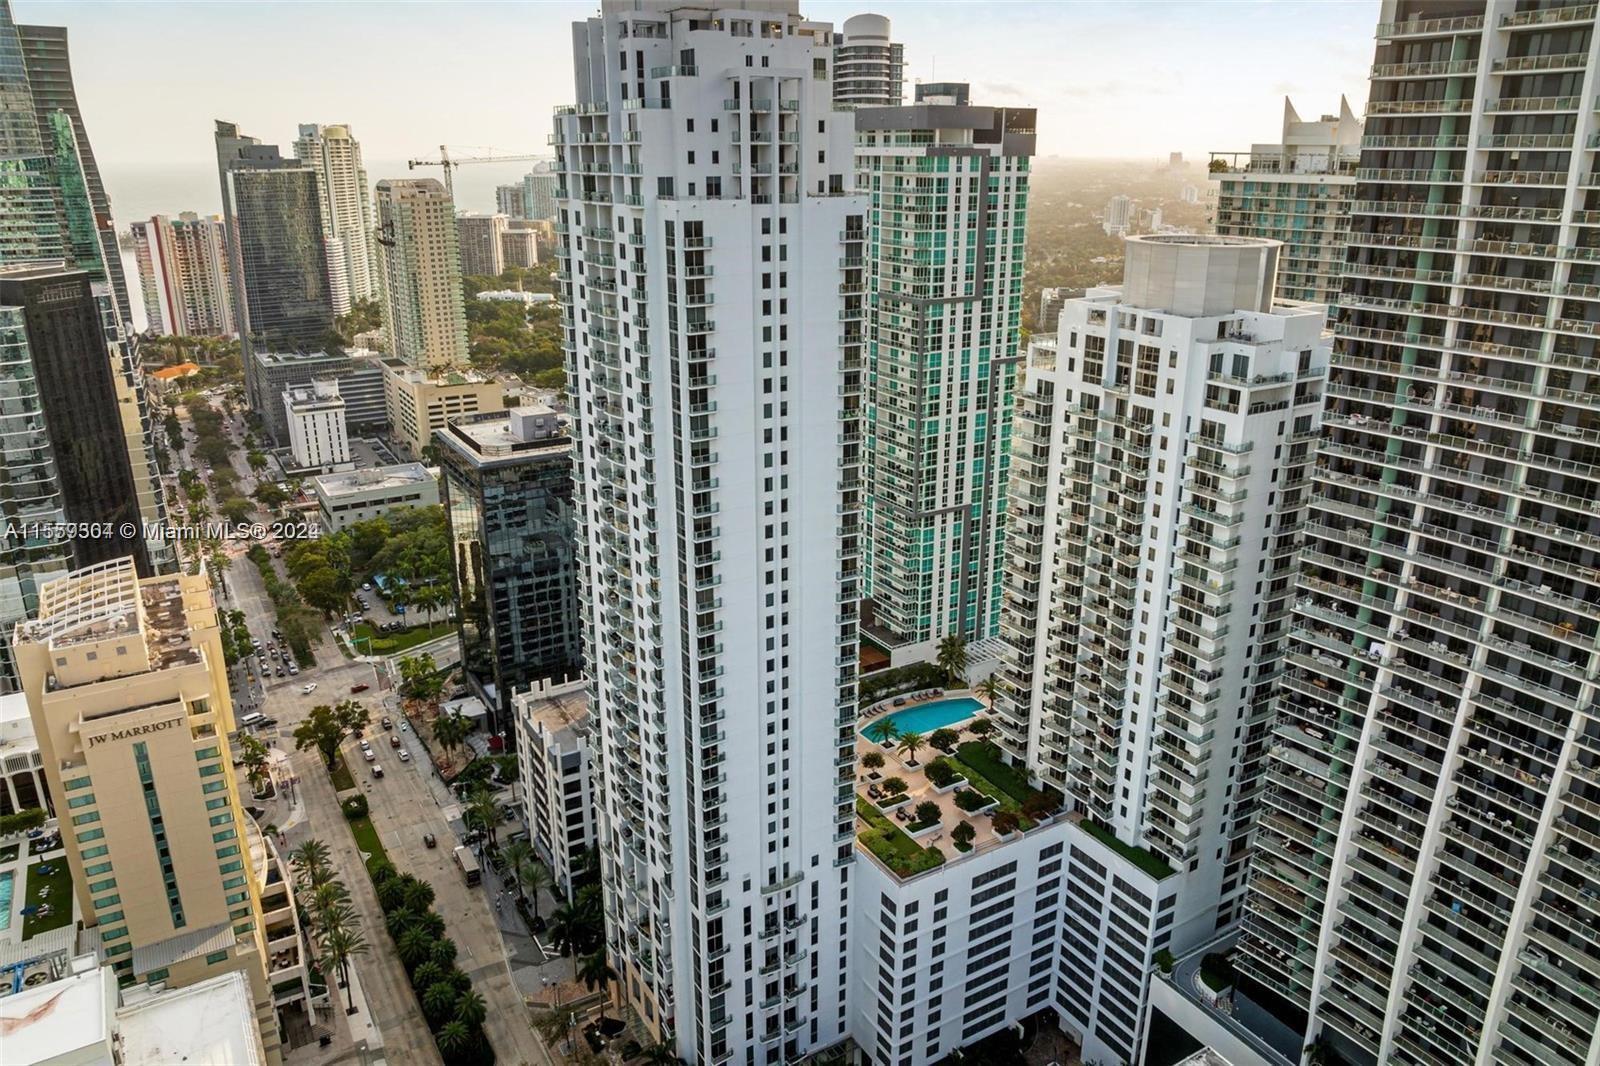 Spacious 1 bedroom apartment at 1060 Brickell Condo. Live in the heart of Brickell, close to the act